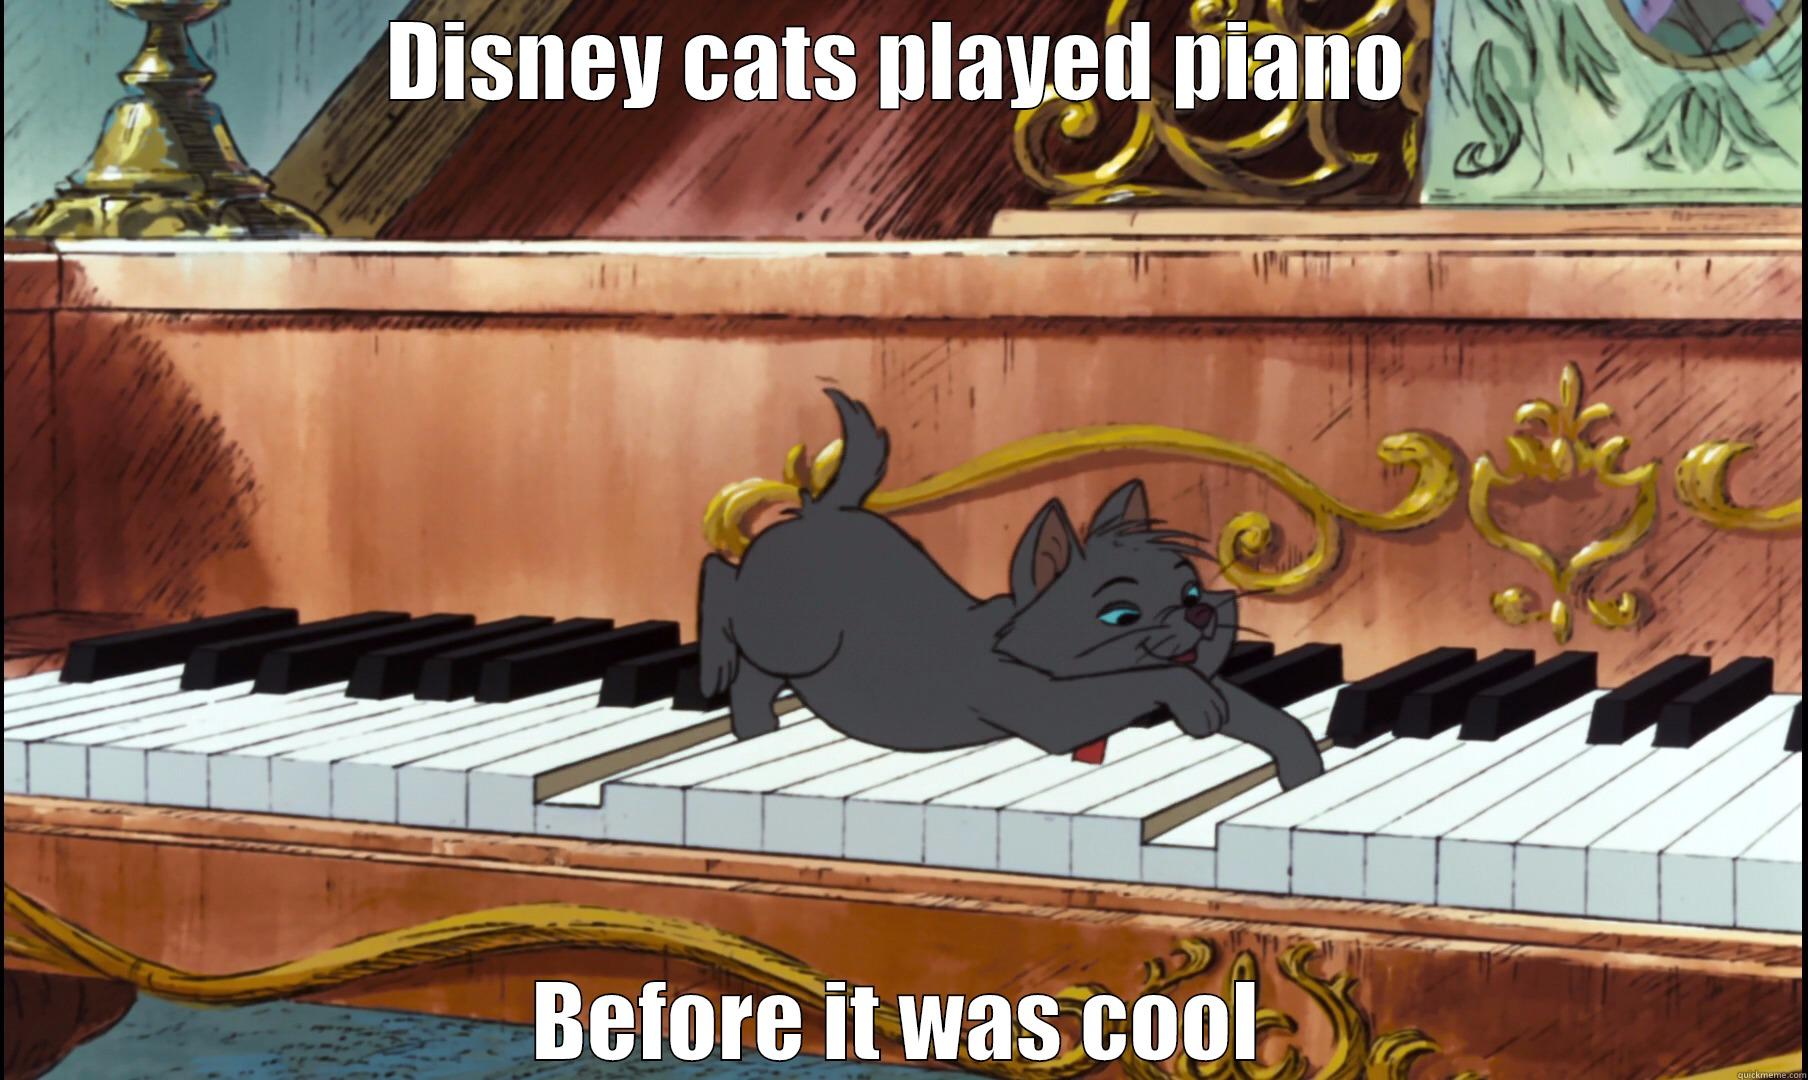 Disney cats playing piano - DISNEY CATS PLAYED PIANO BEFORE IT WAS COOL Misc